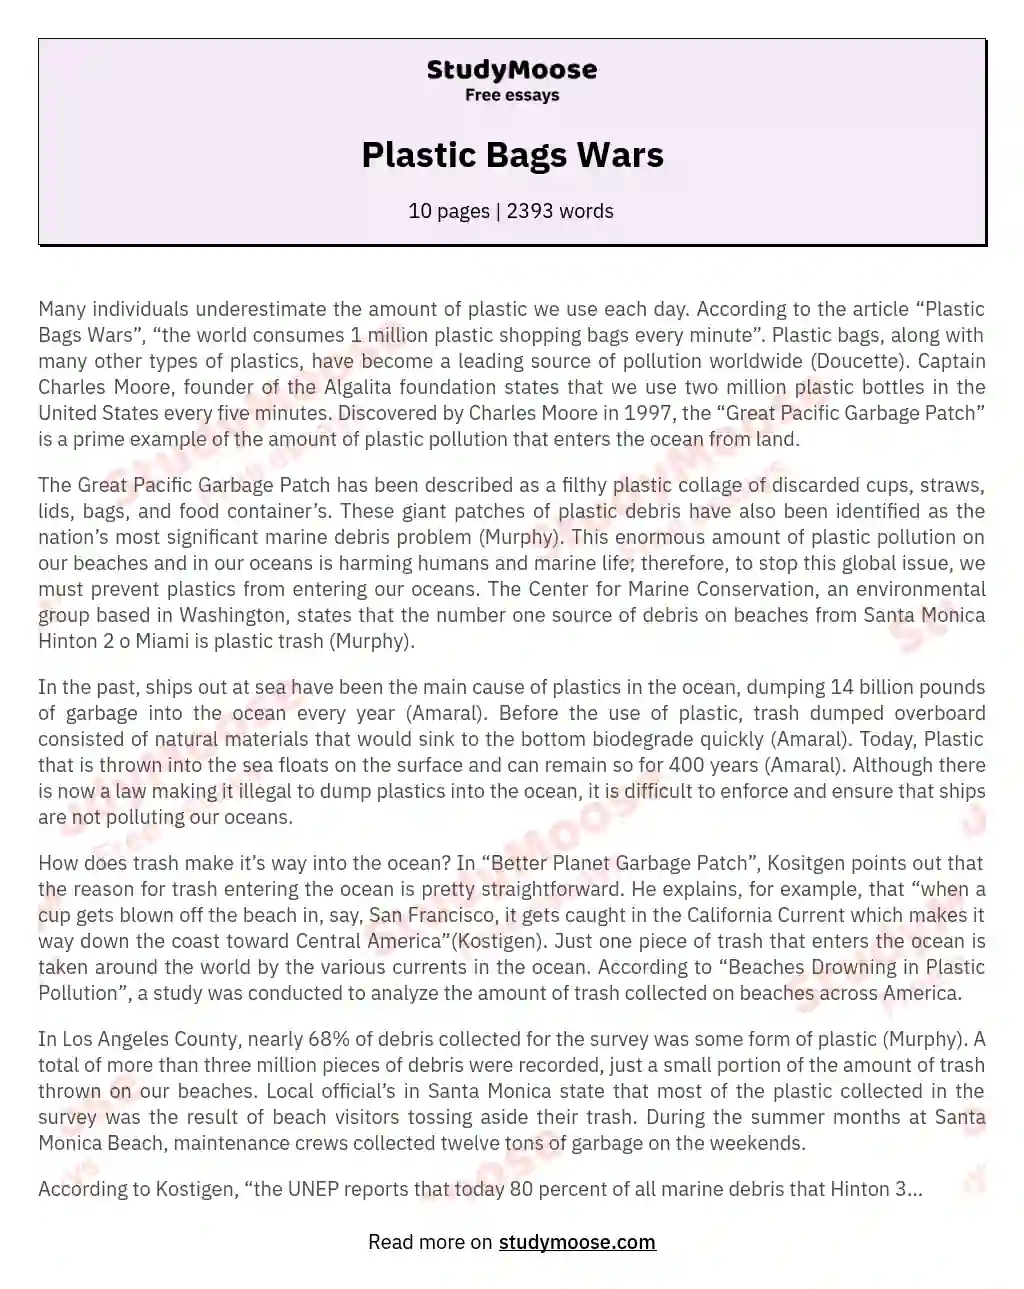 The Impact of Plastic Pollution on Our Oceans essay